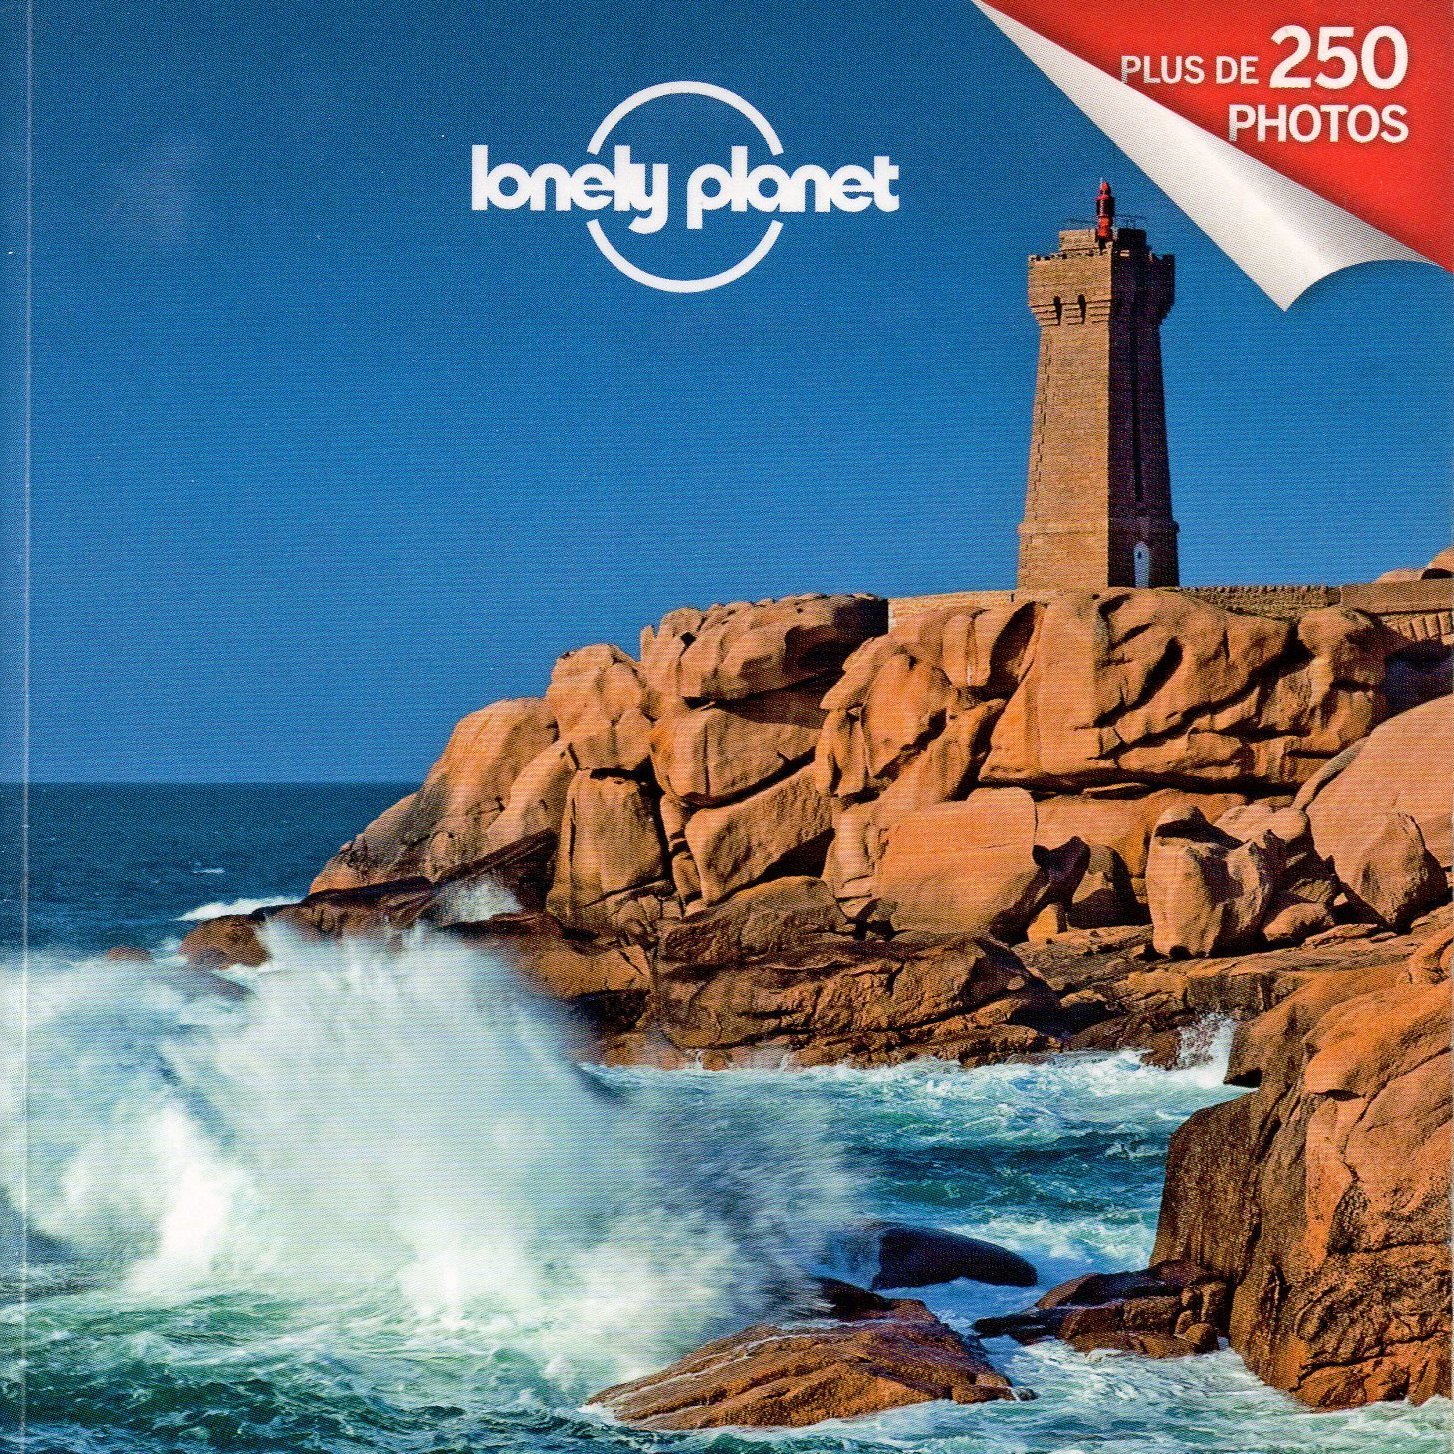 
Lonely planet - From Nantes to Saint-Nazaire